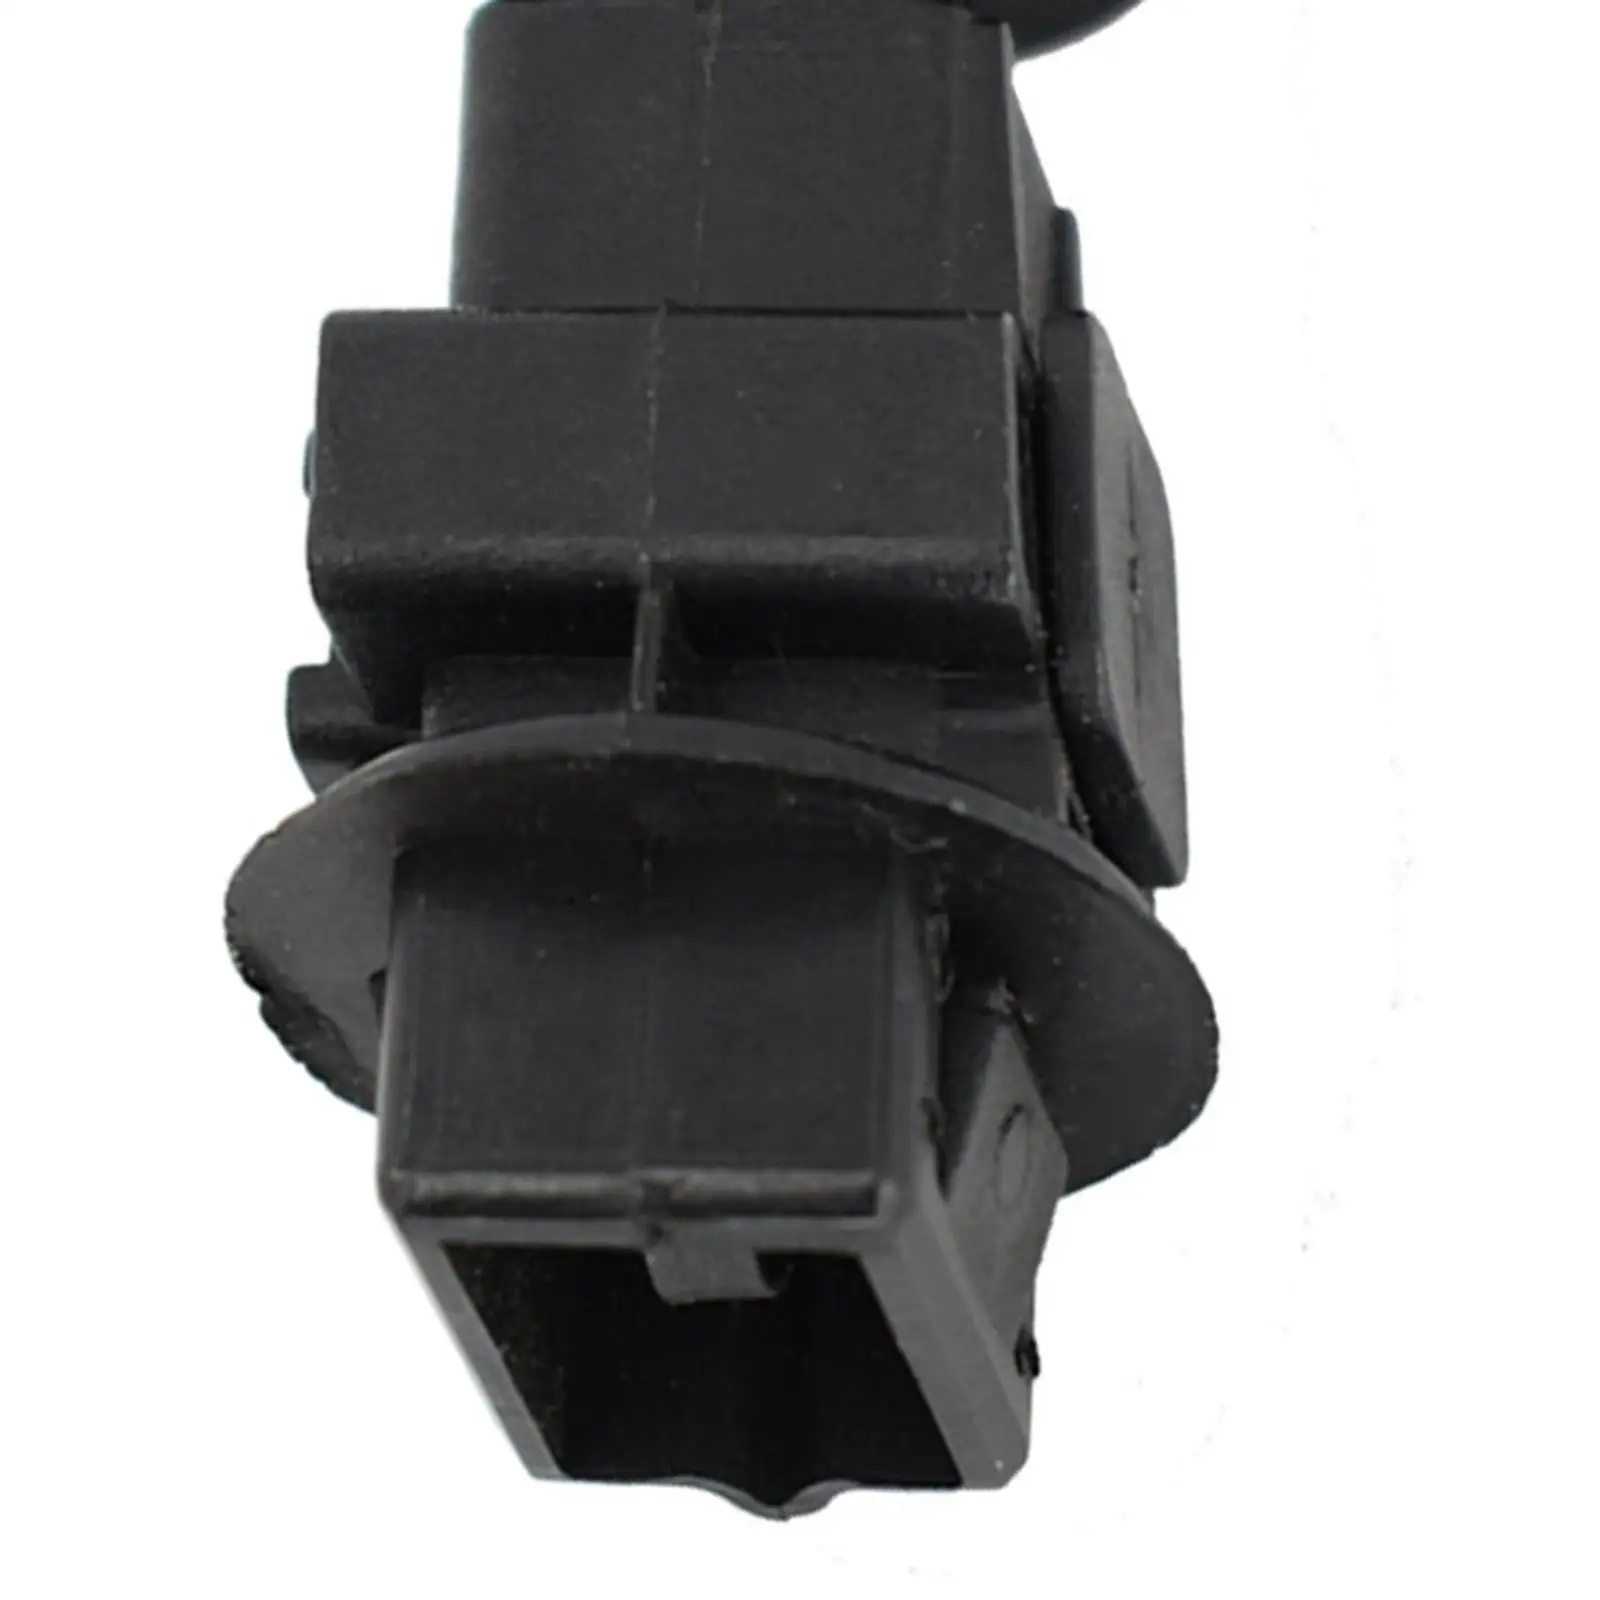 Rear Trunk Stop Buffer 65822-br00A Hood Stop Support Buffer Spare Parts Hood Stopper Cushion for Nissan Qashqai